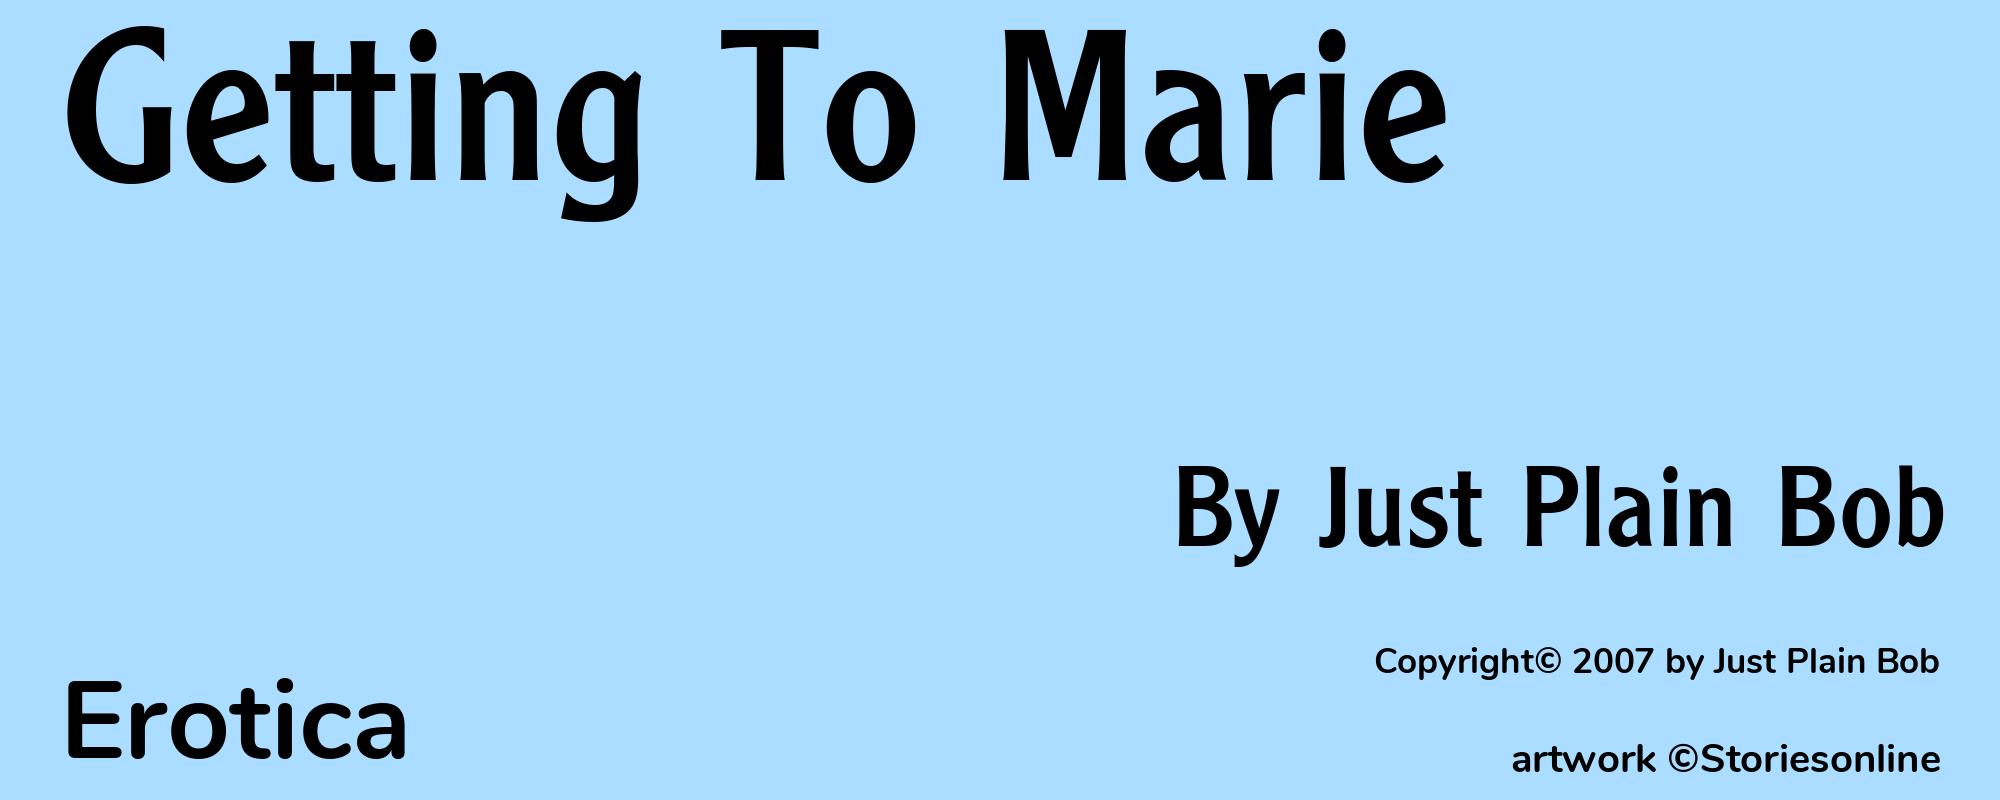 Getting To Marie - Cover